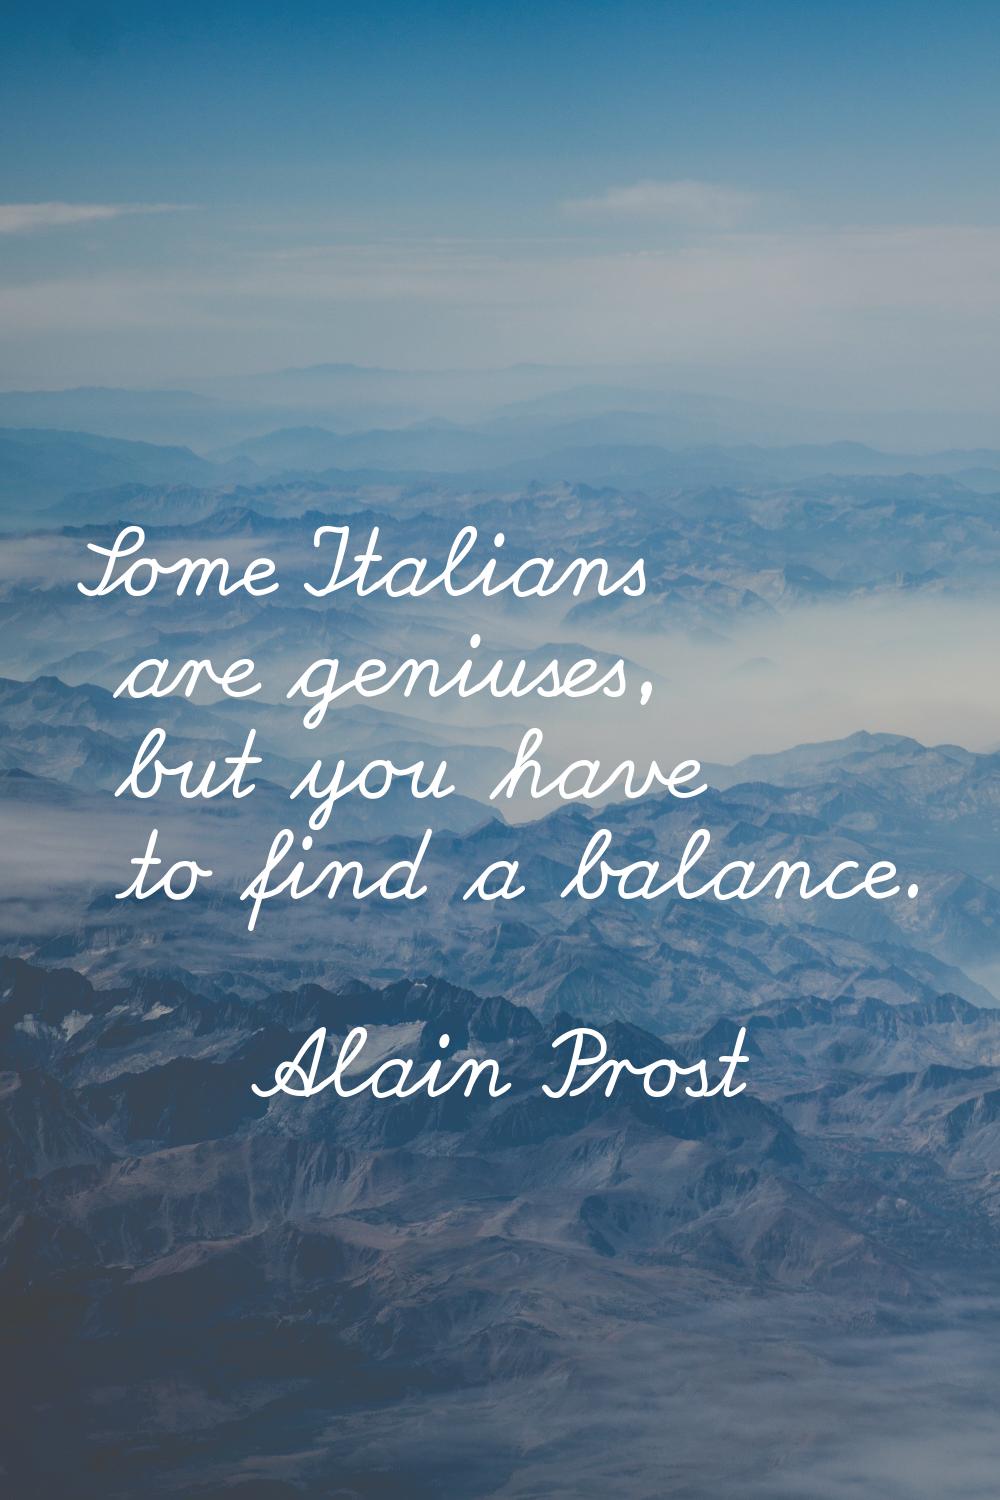 Some Italians are geniuses, but you have to find a balance.